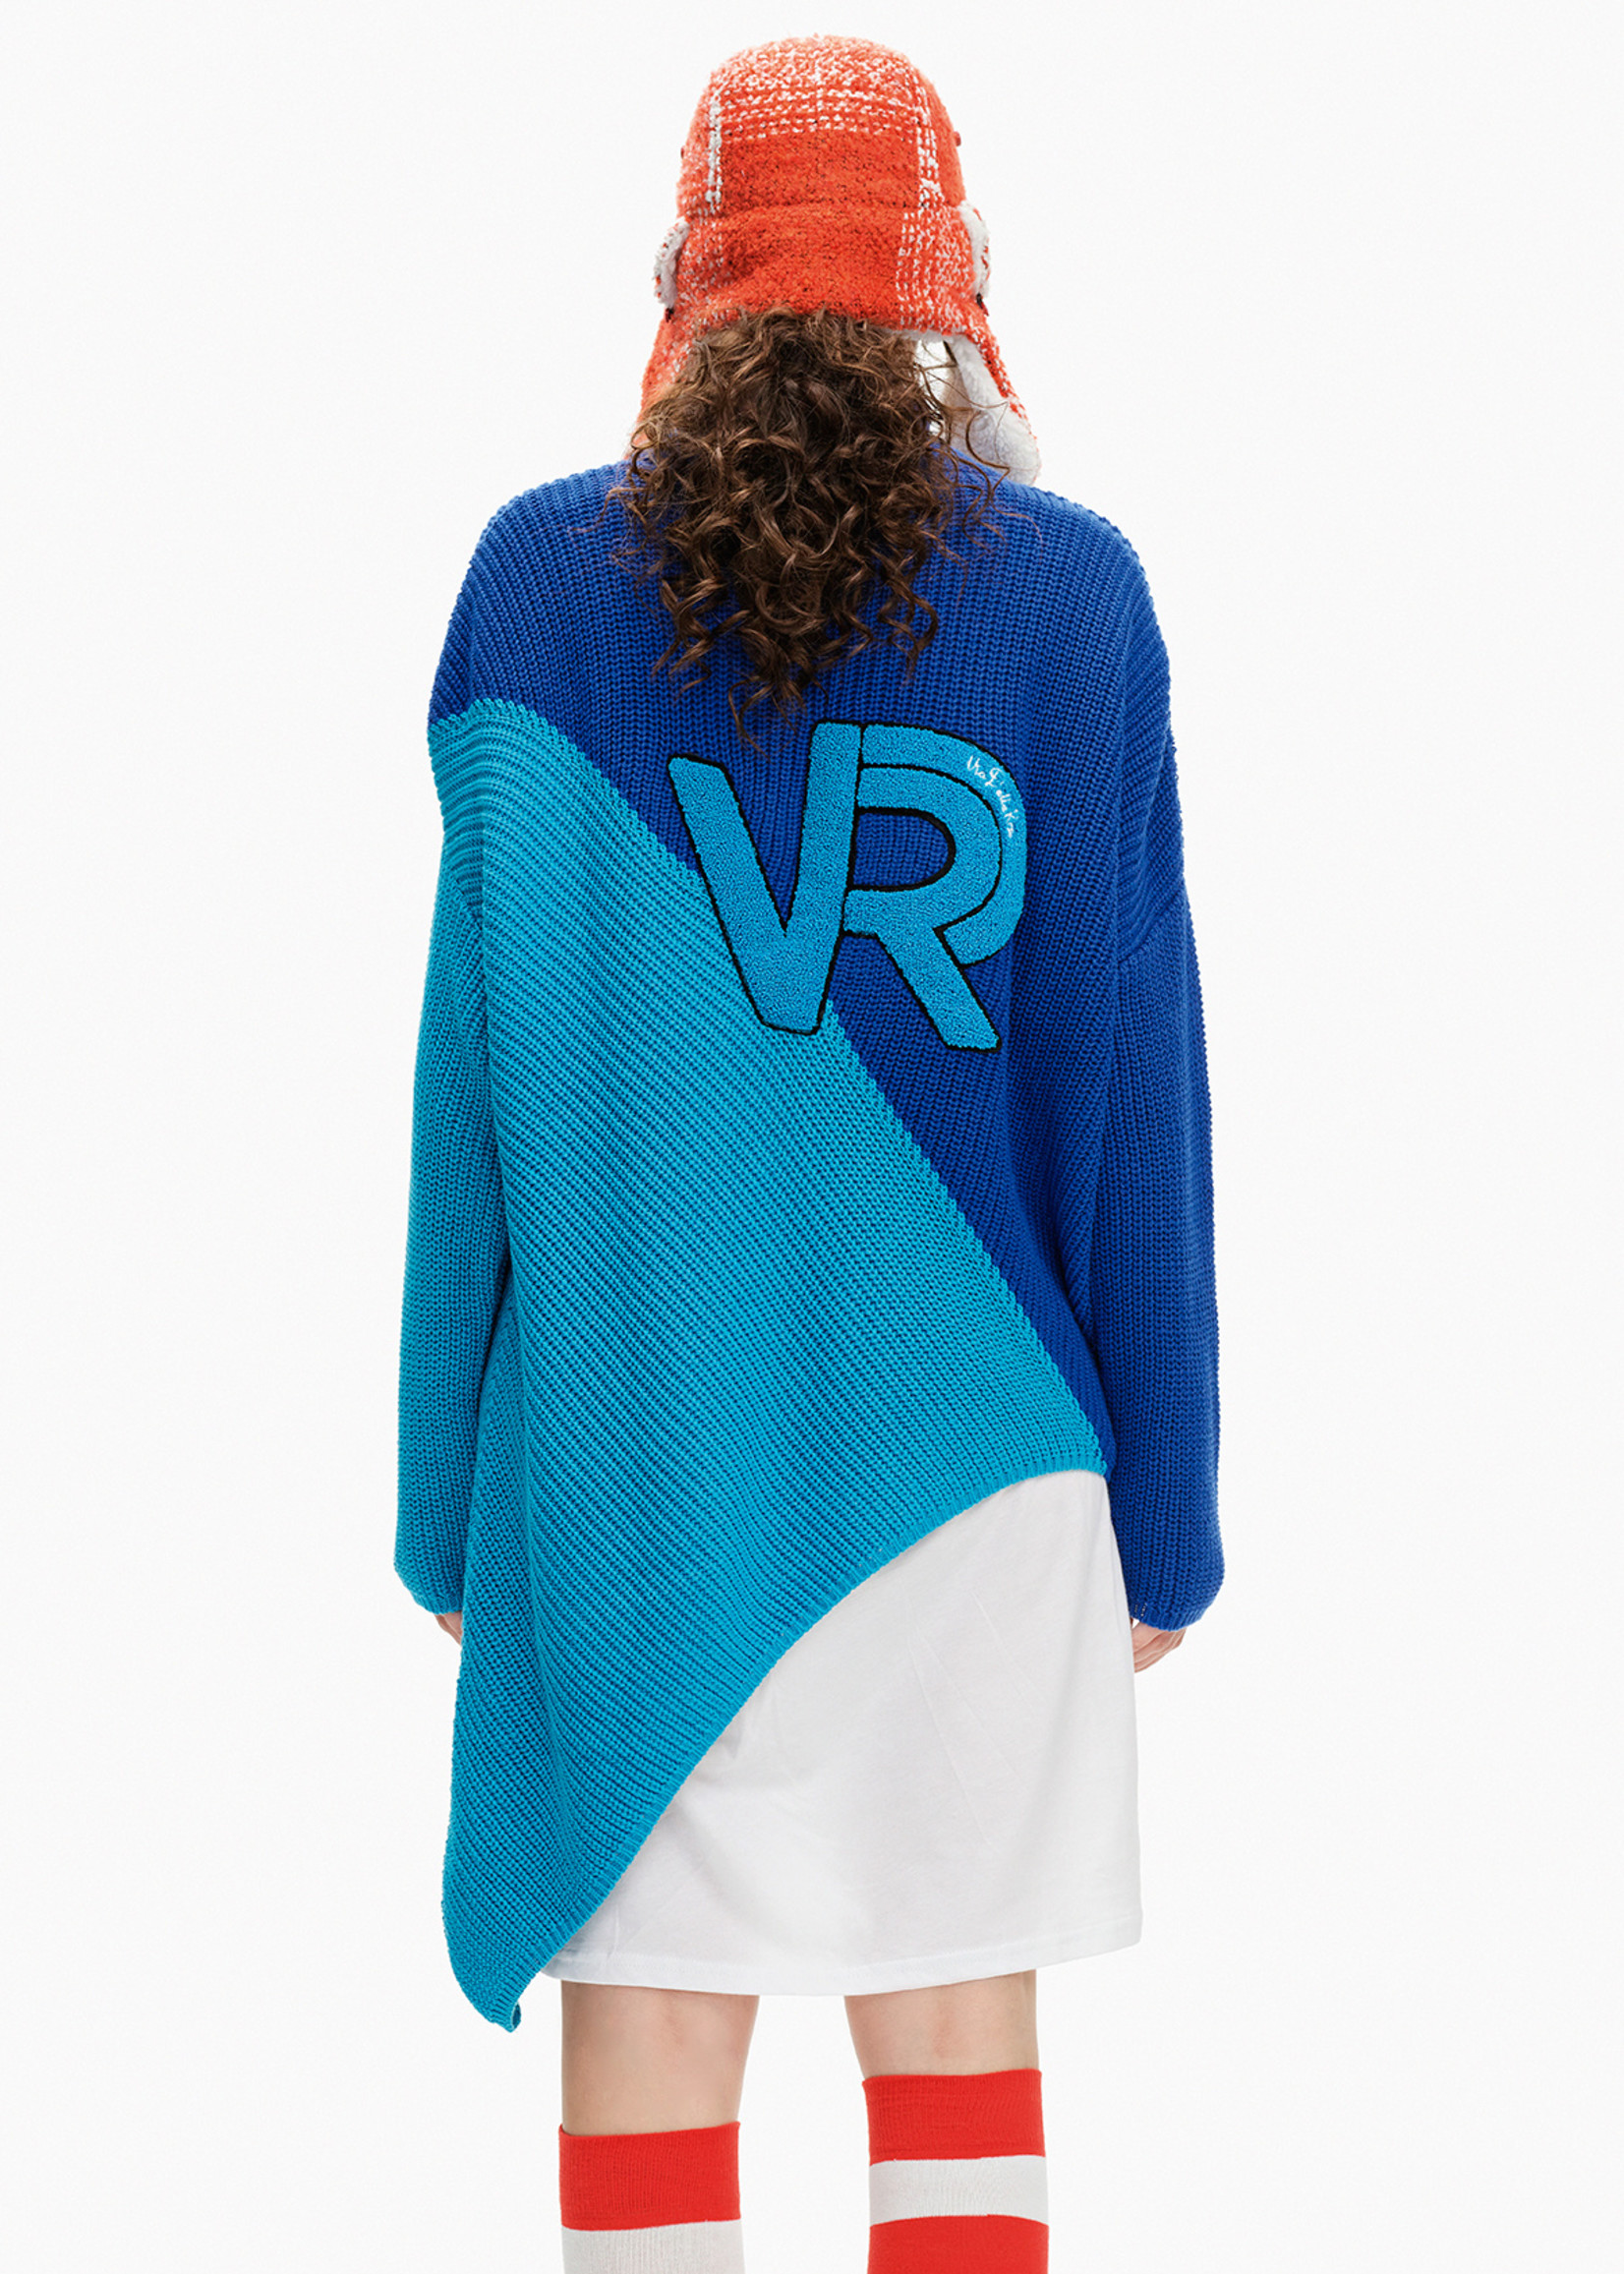 VDR TWO TONES SWEATER 10015